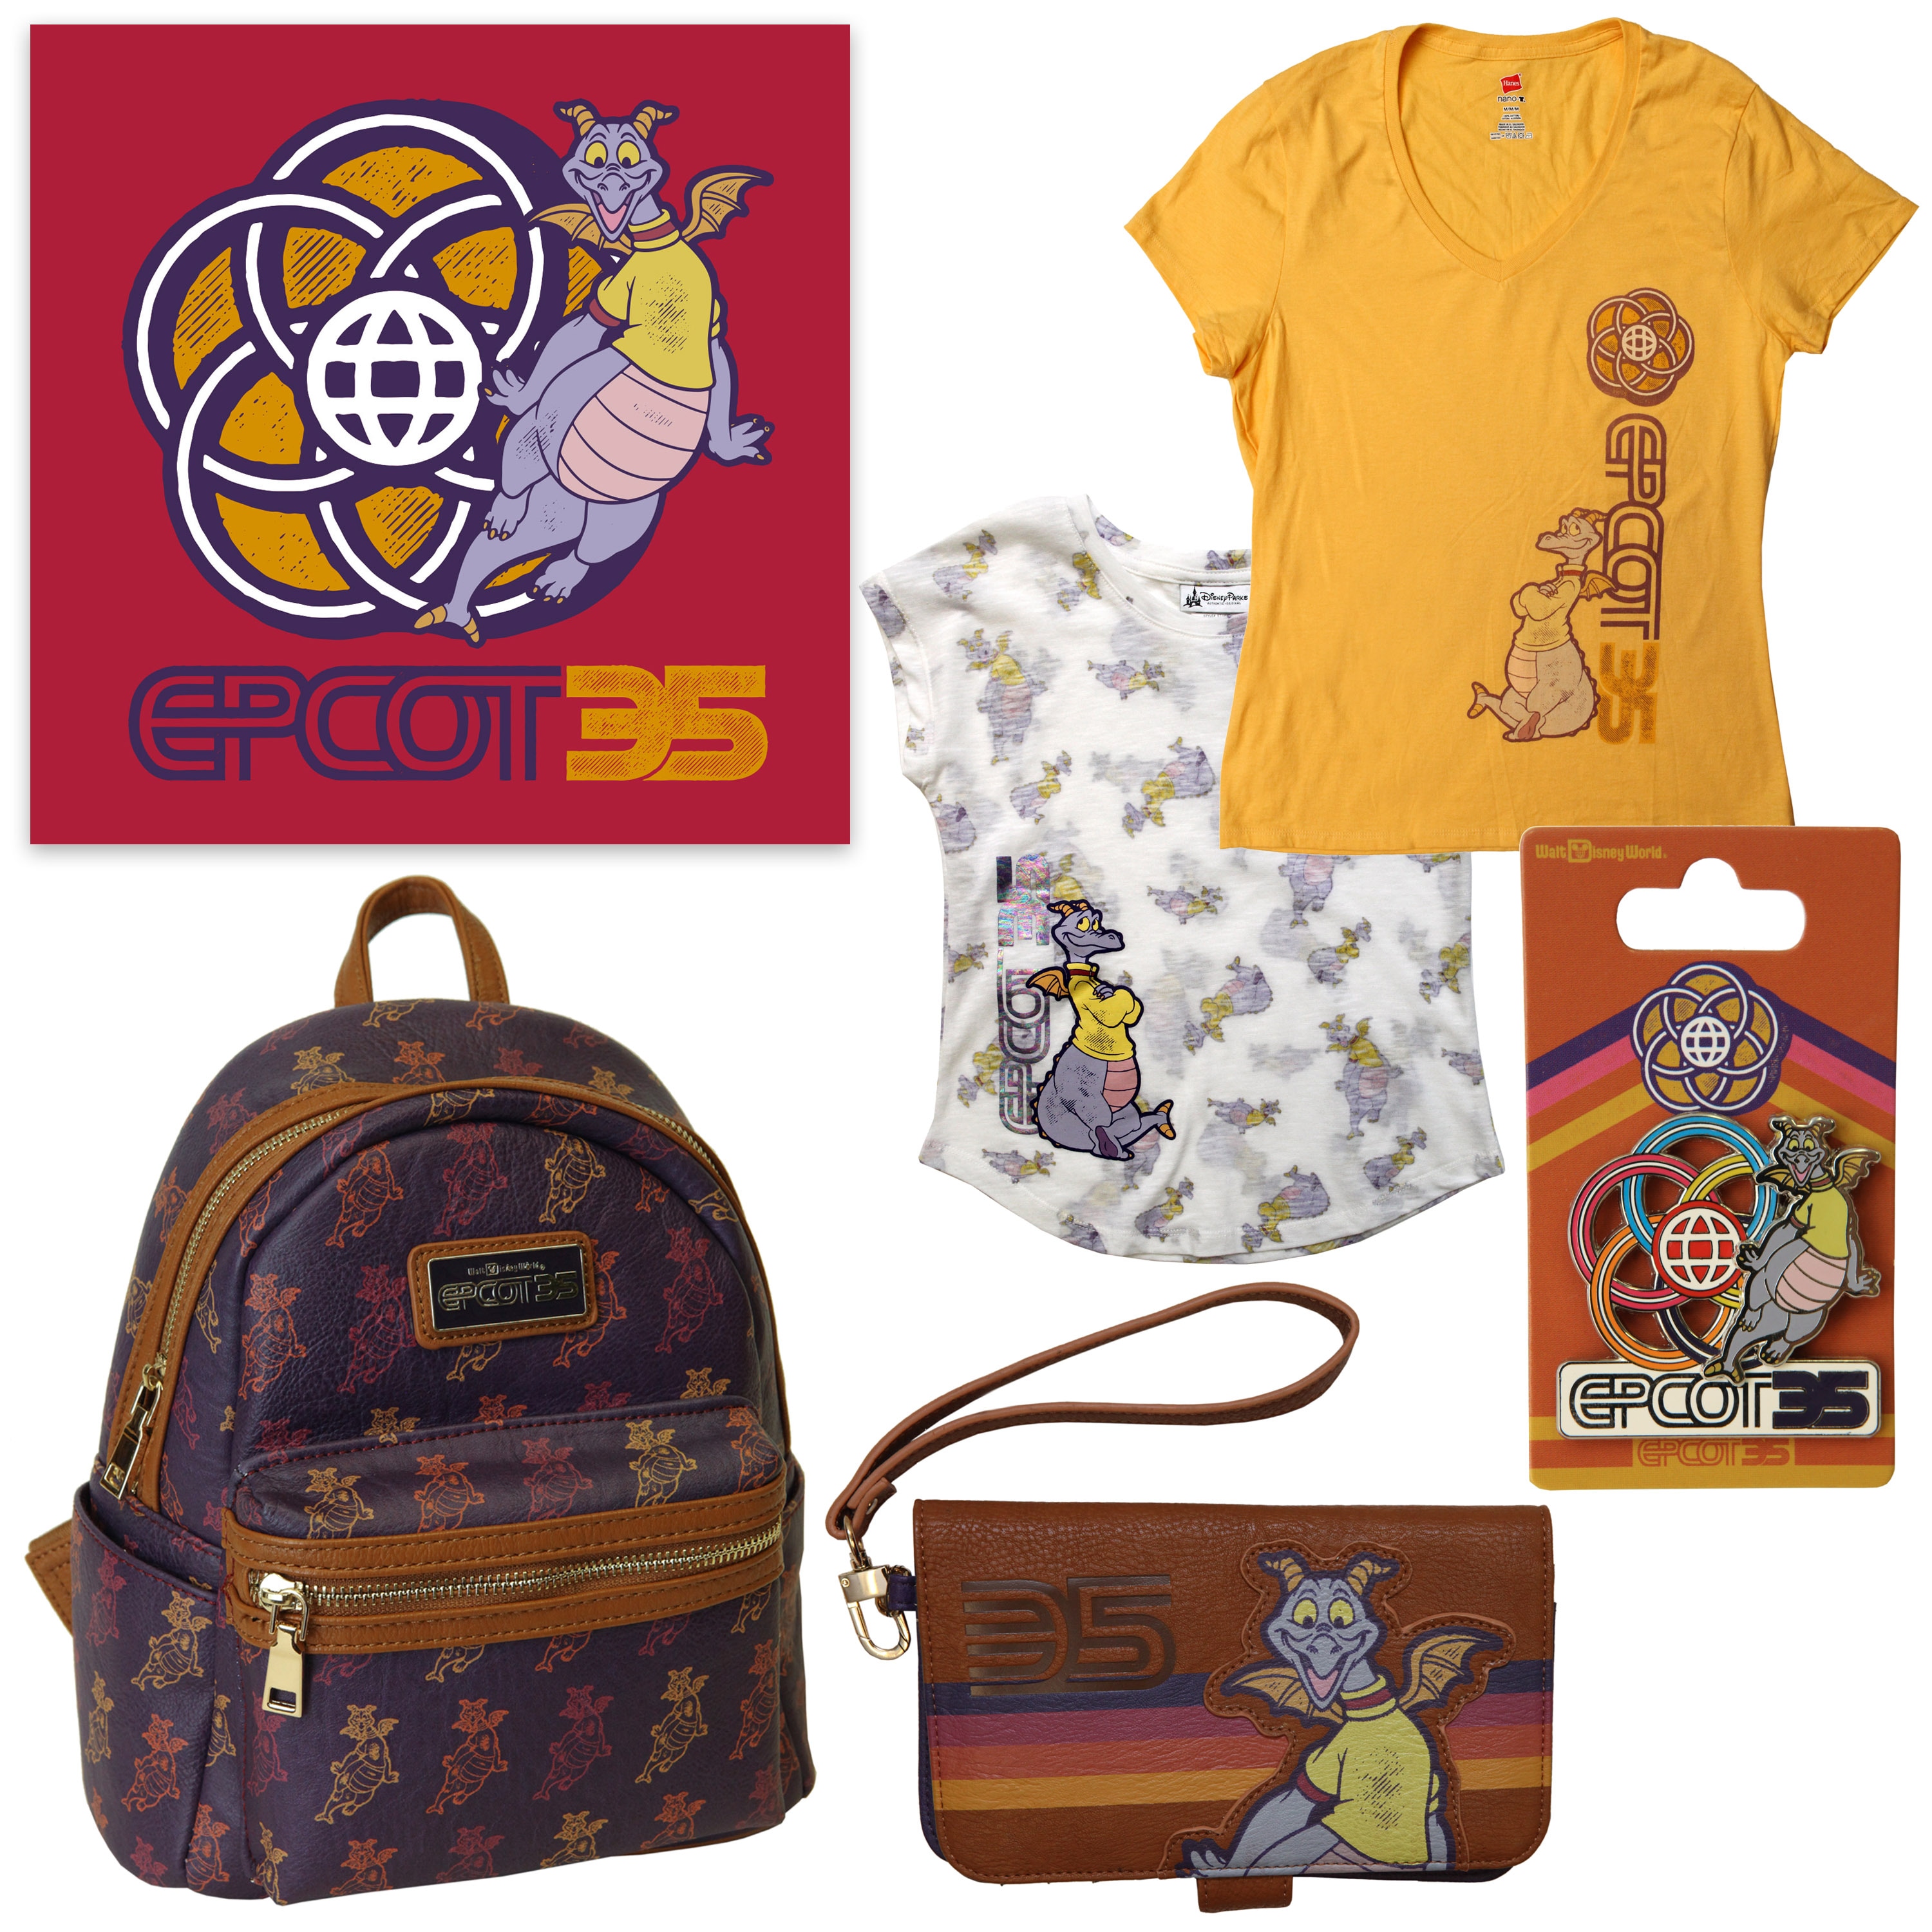 Merchandise for 35th Anniversary of Epcot